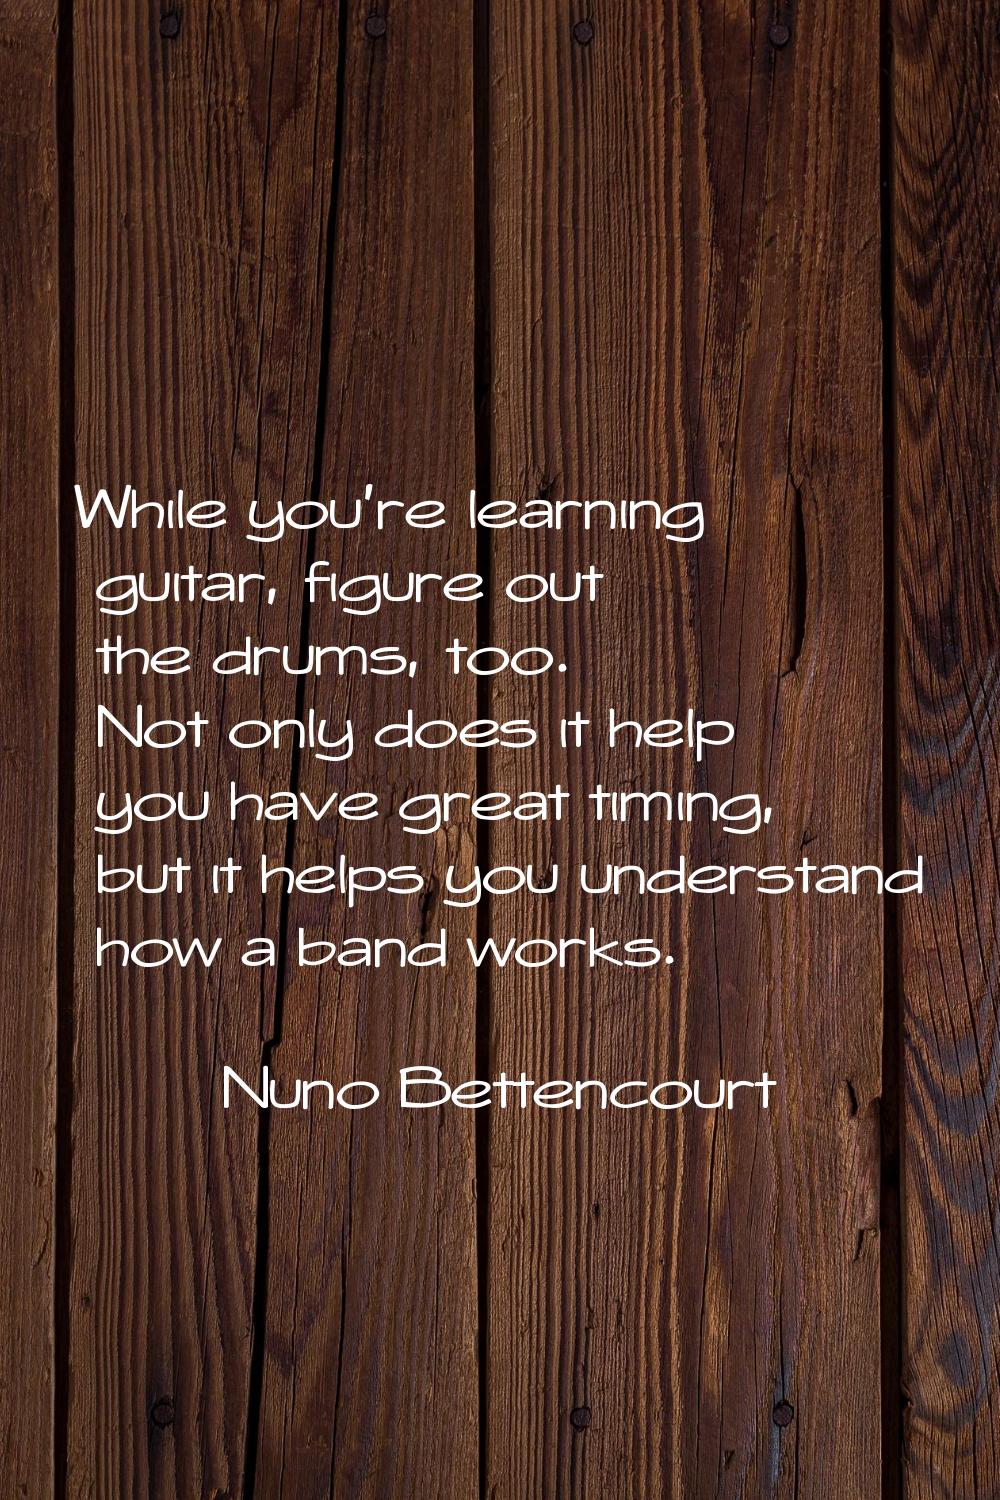 While you're learning guitar, figure out the drums, too. Not only does it help you have great timin